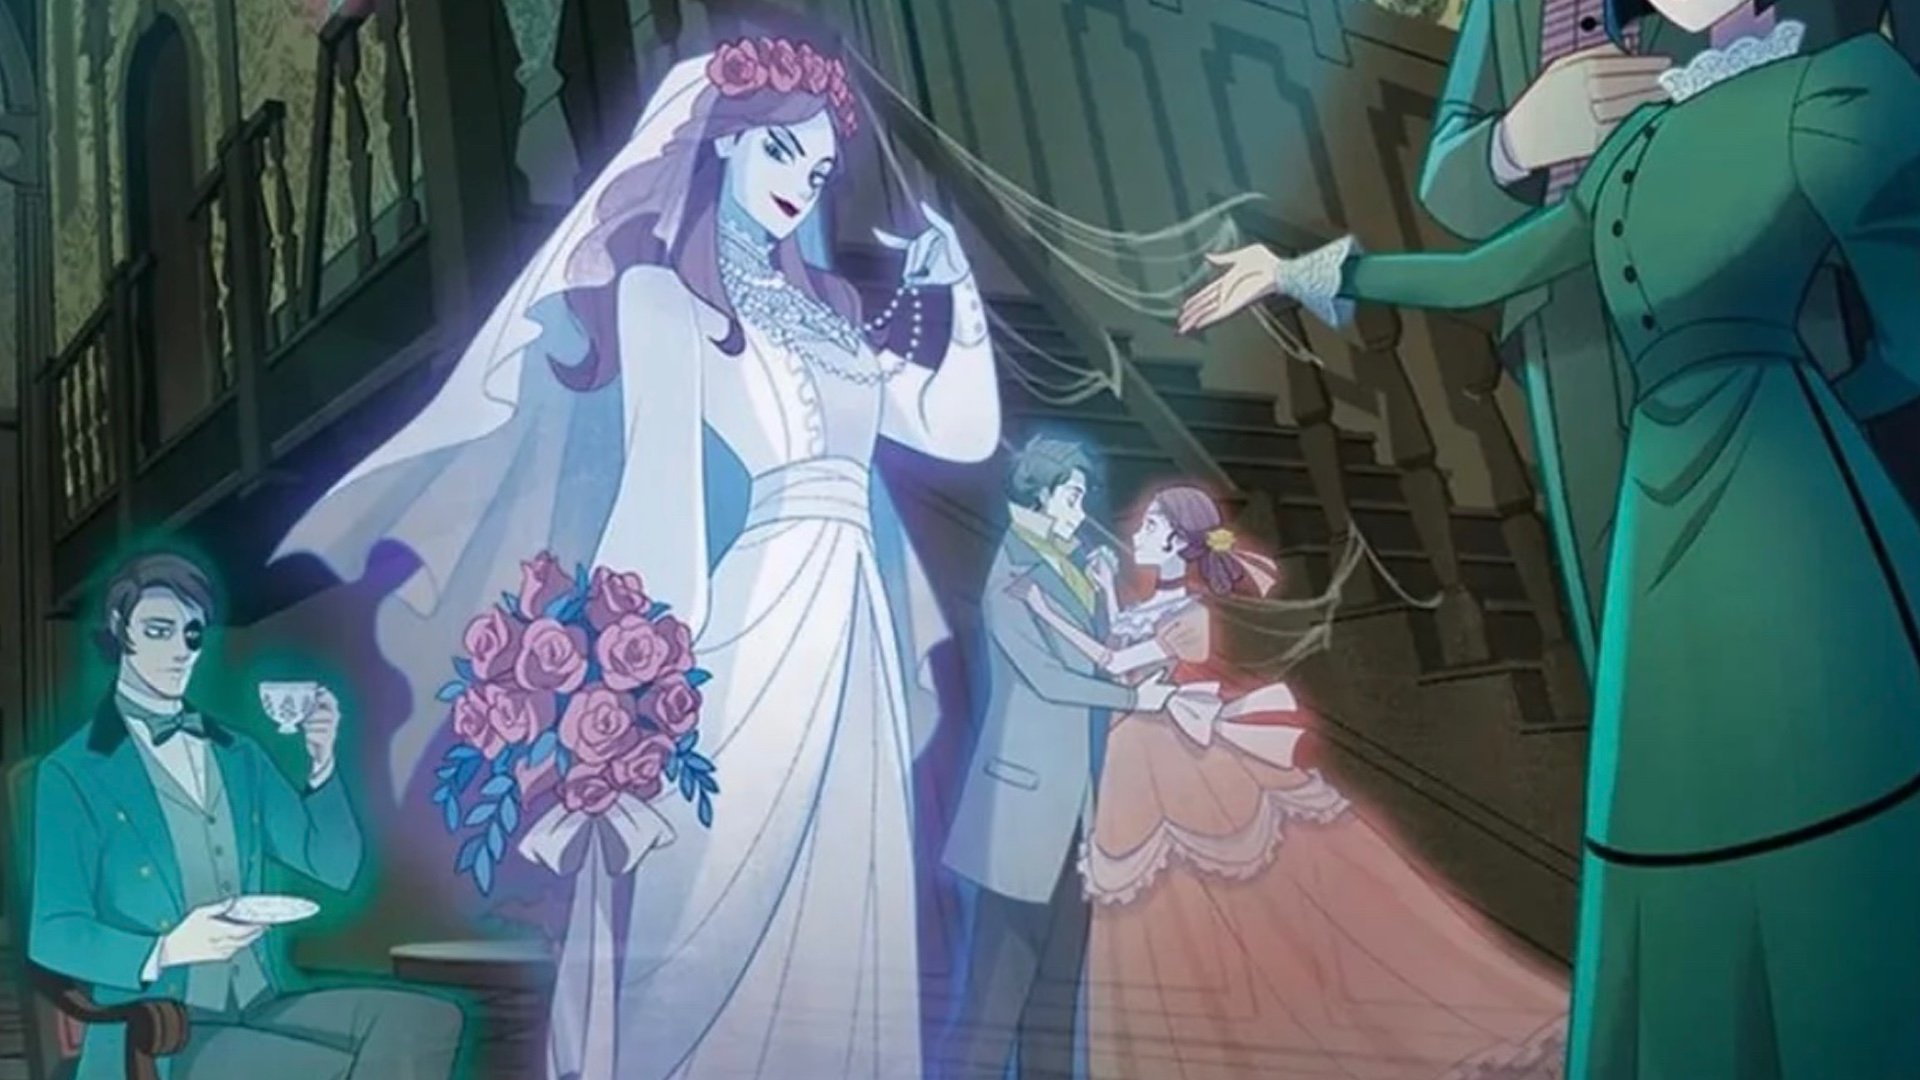 Tokyo Disneyland is Giving THE HAUNTED MANSION Attraction an Anime Re-Theme  — GeekTyrant